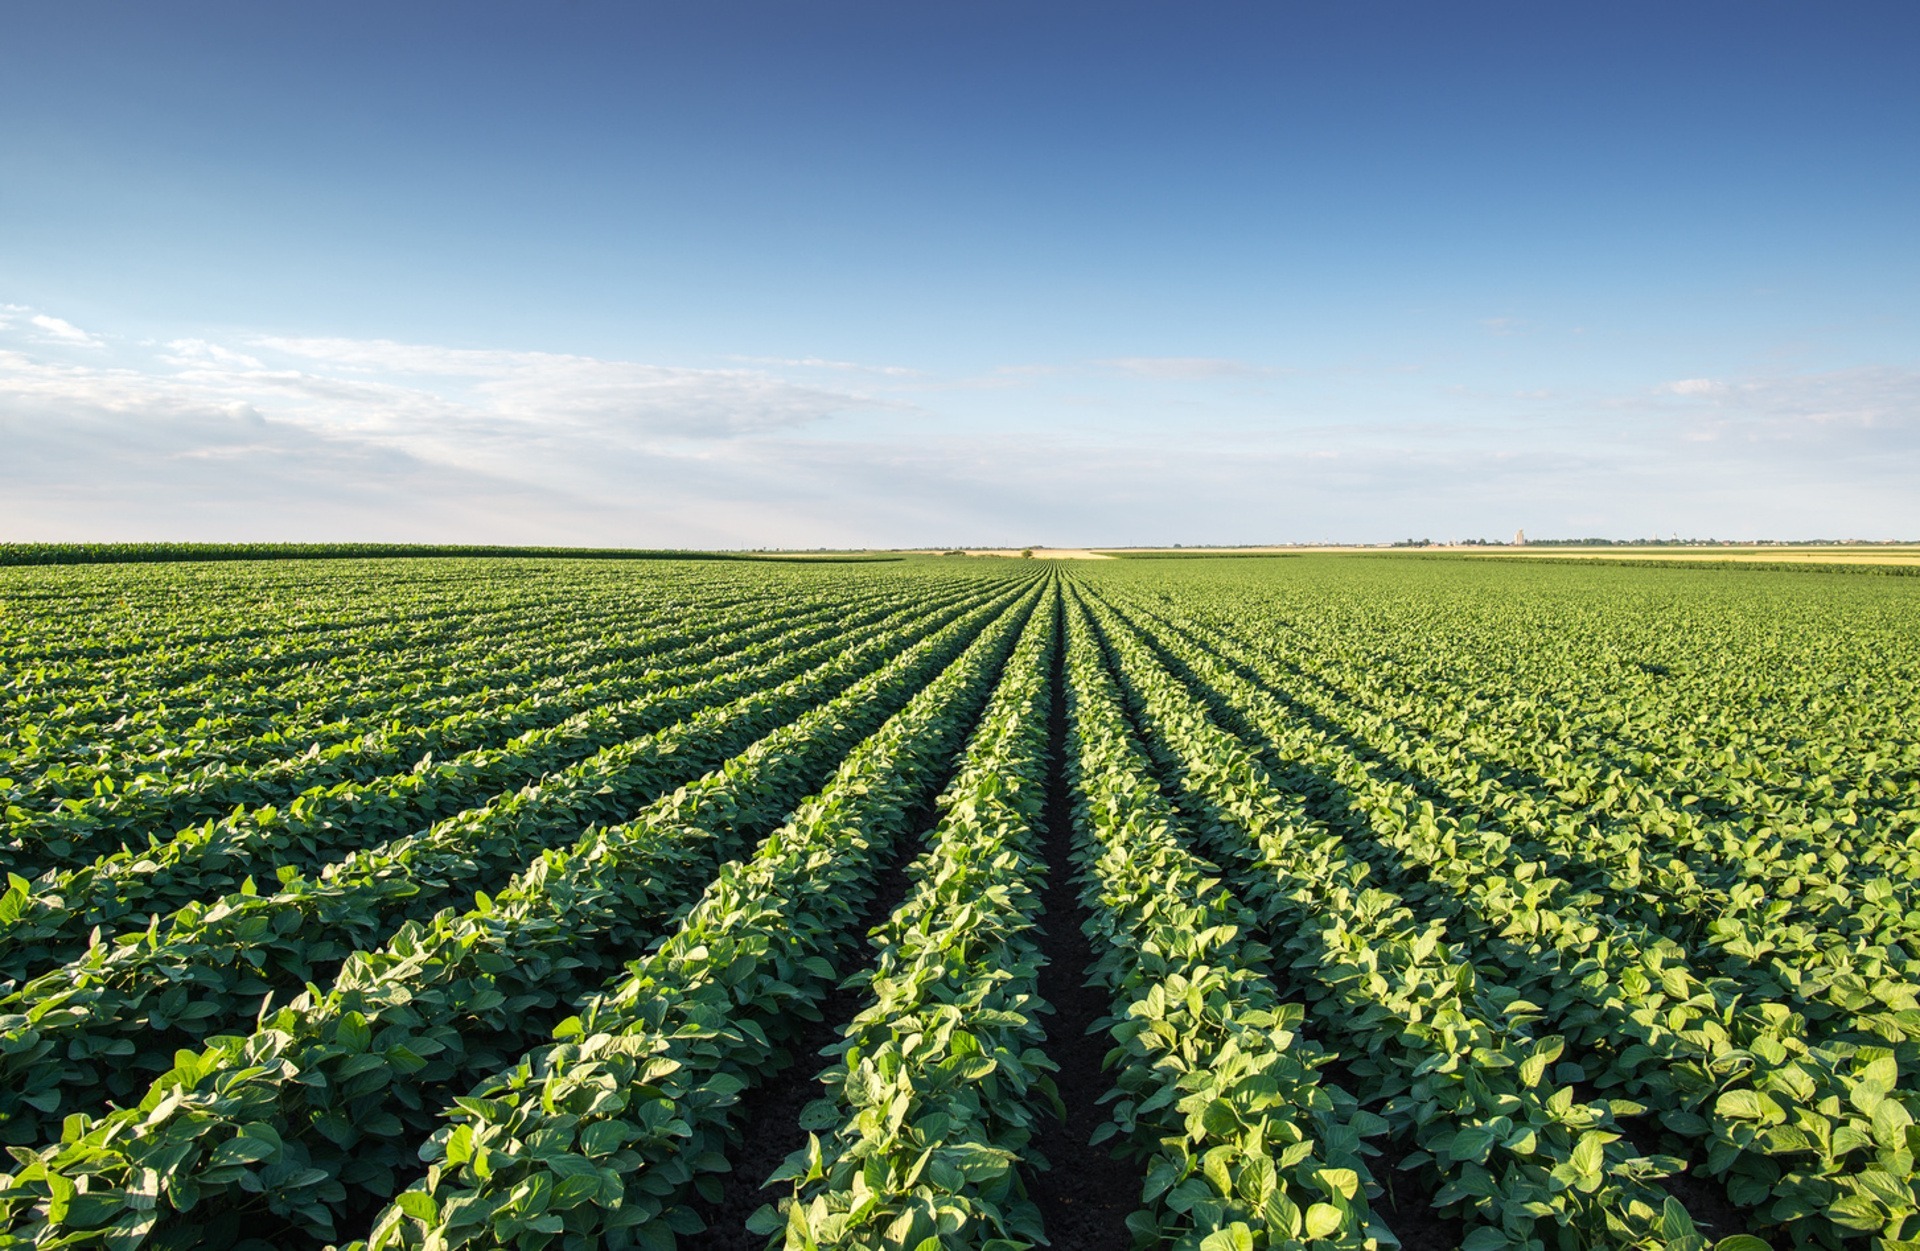 Higher Crop Productivity and Greater Efficiency